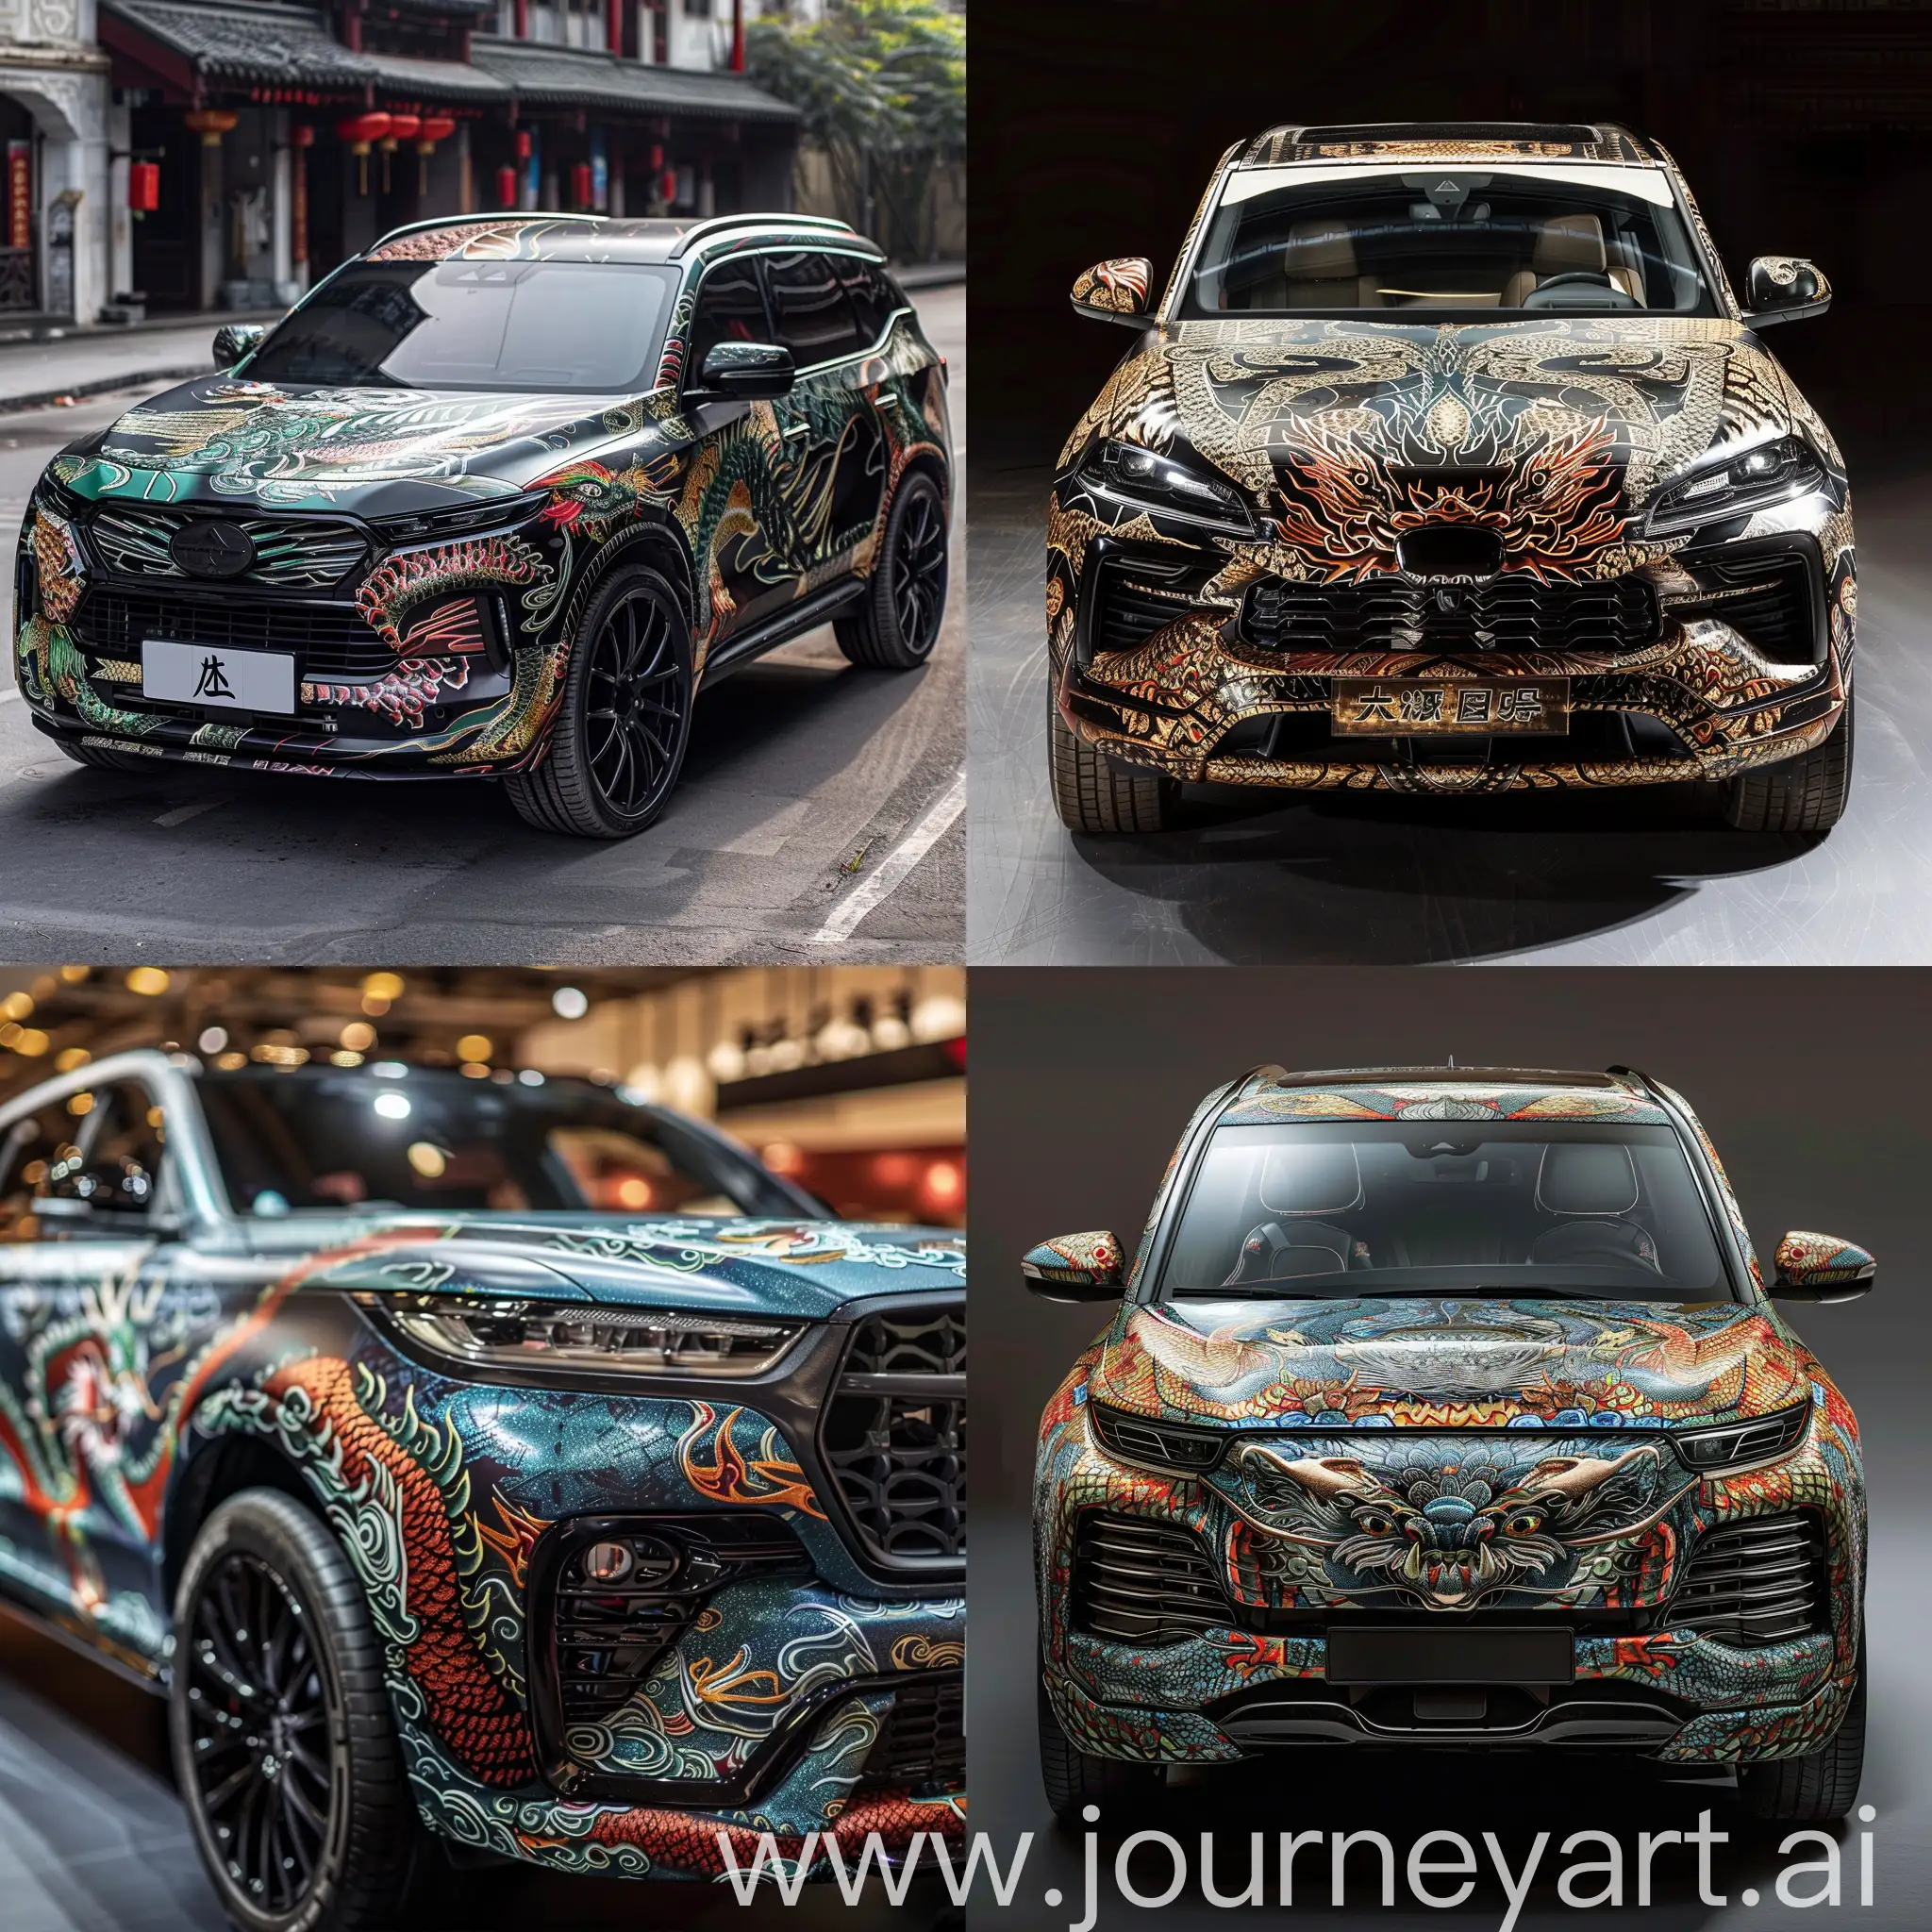 DragonThemed-SUV-Chinese-Culture-Inspired-Car-Decorated-with-Dragon-Images